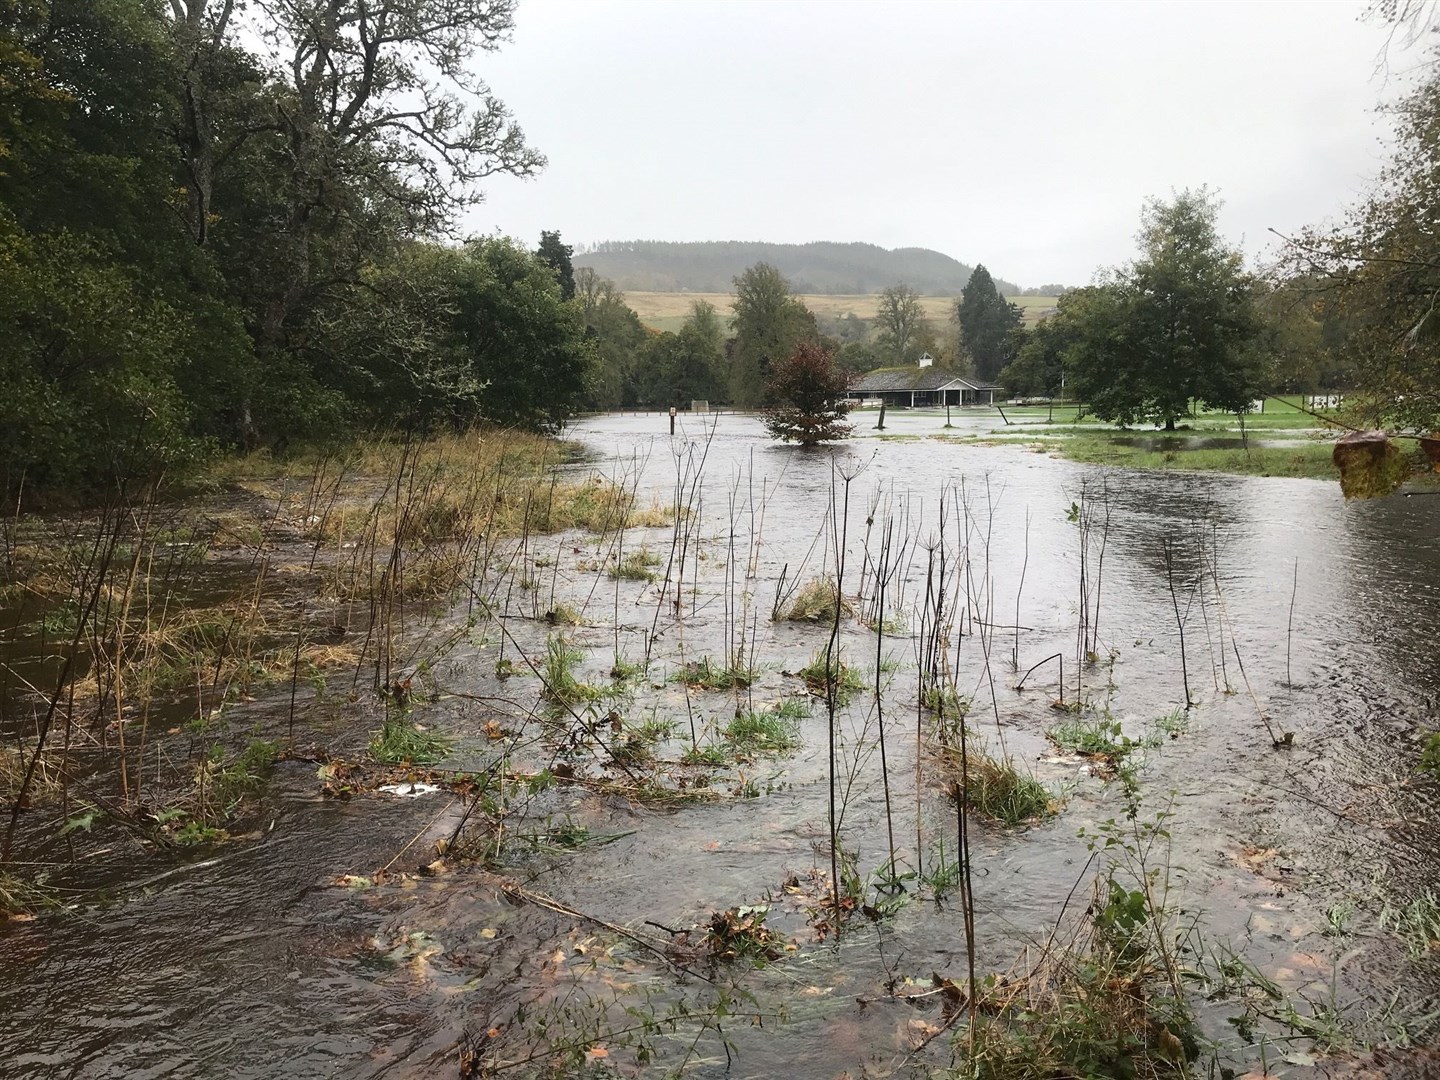 The grounds of Castle Leod have been hammered by flooding from the River Peffery in the wake of Storm Babet. The shinty pitch was badly affected.